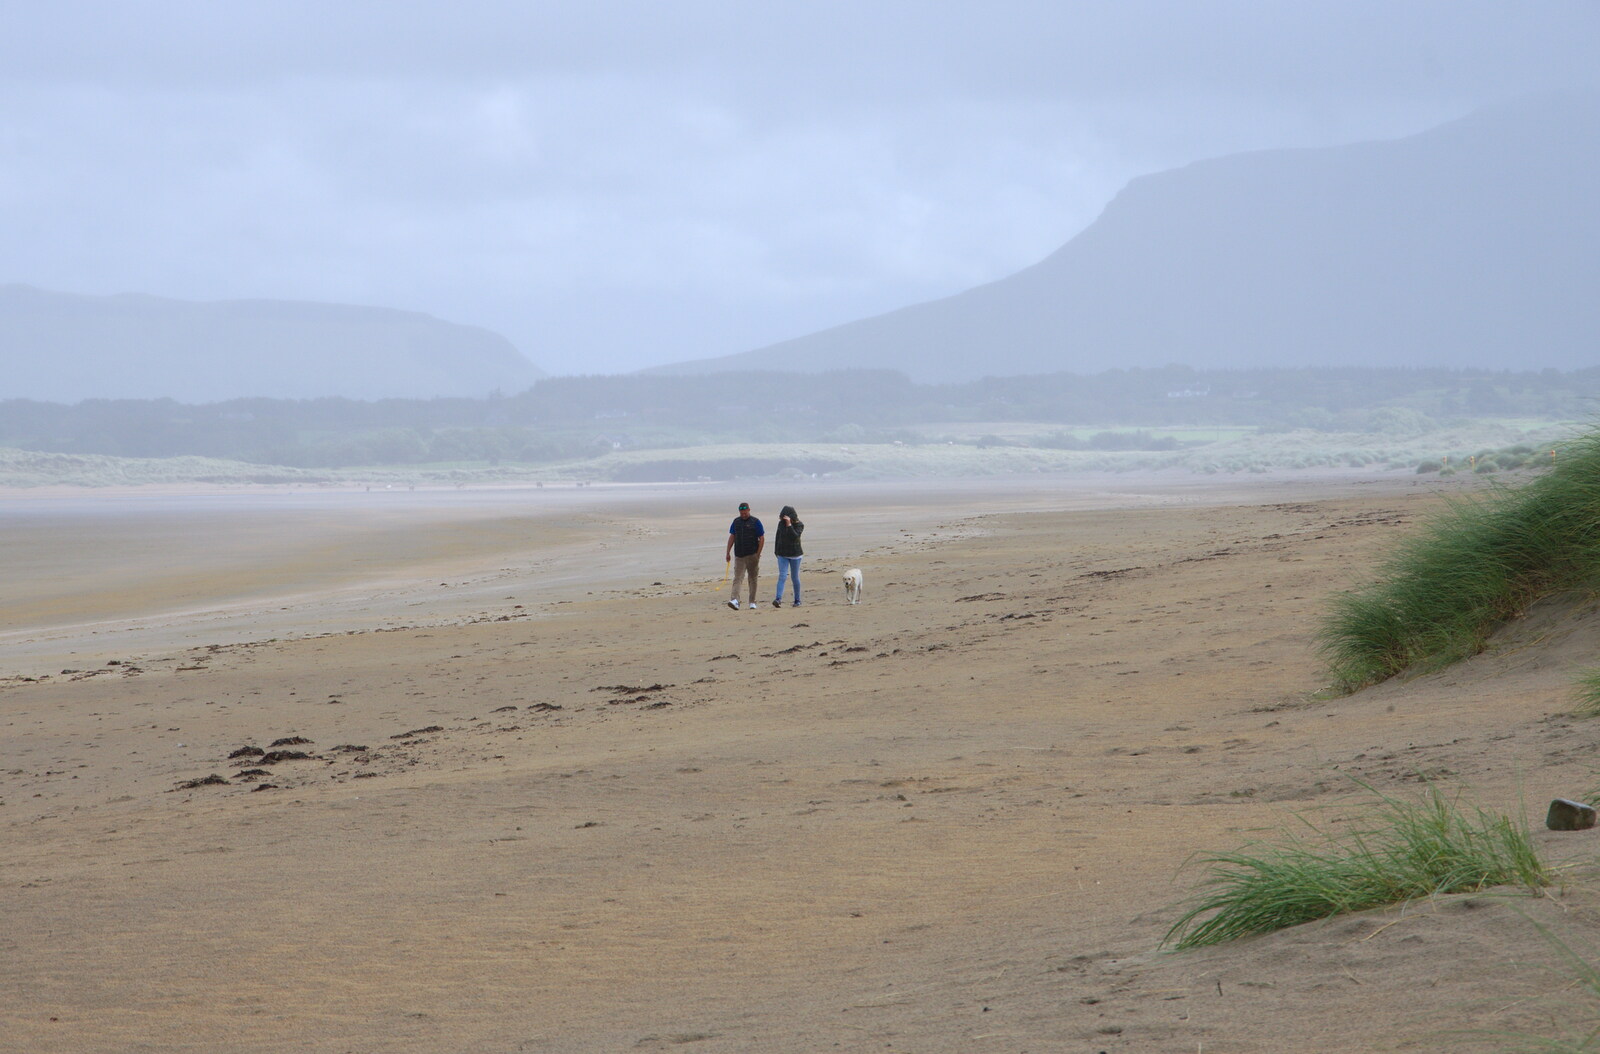 A couple walk around as the weather closes in from Mullaghmore Beach and Marble Arch Caves, Sligo and Fermanagh, Ireland - 19th August 2019